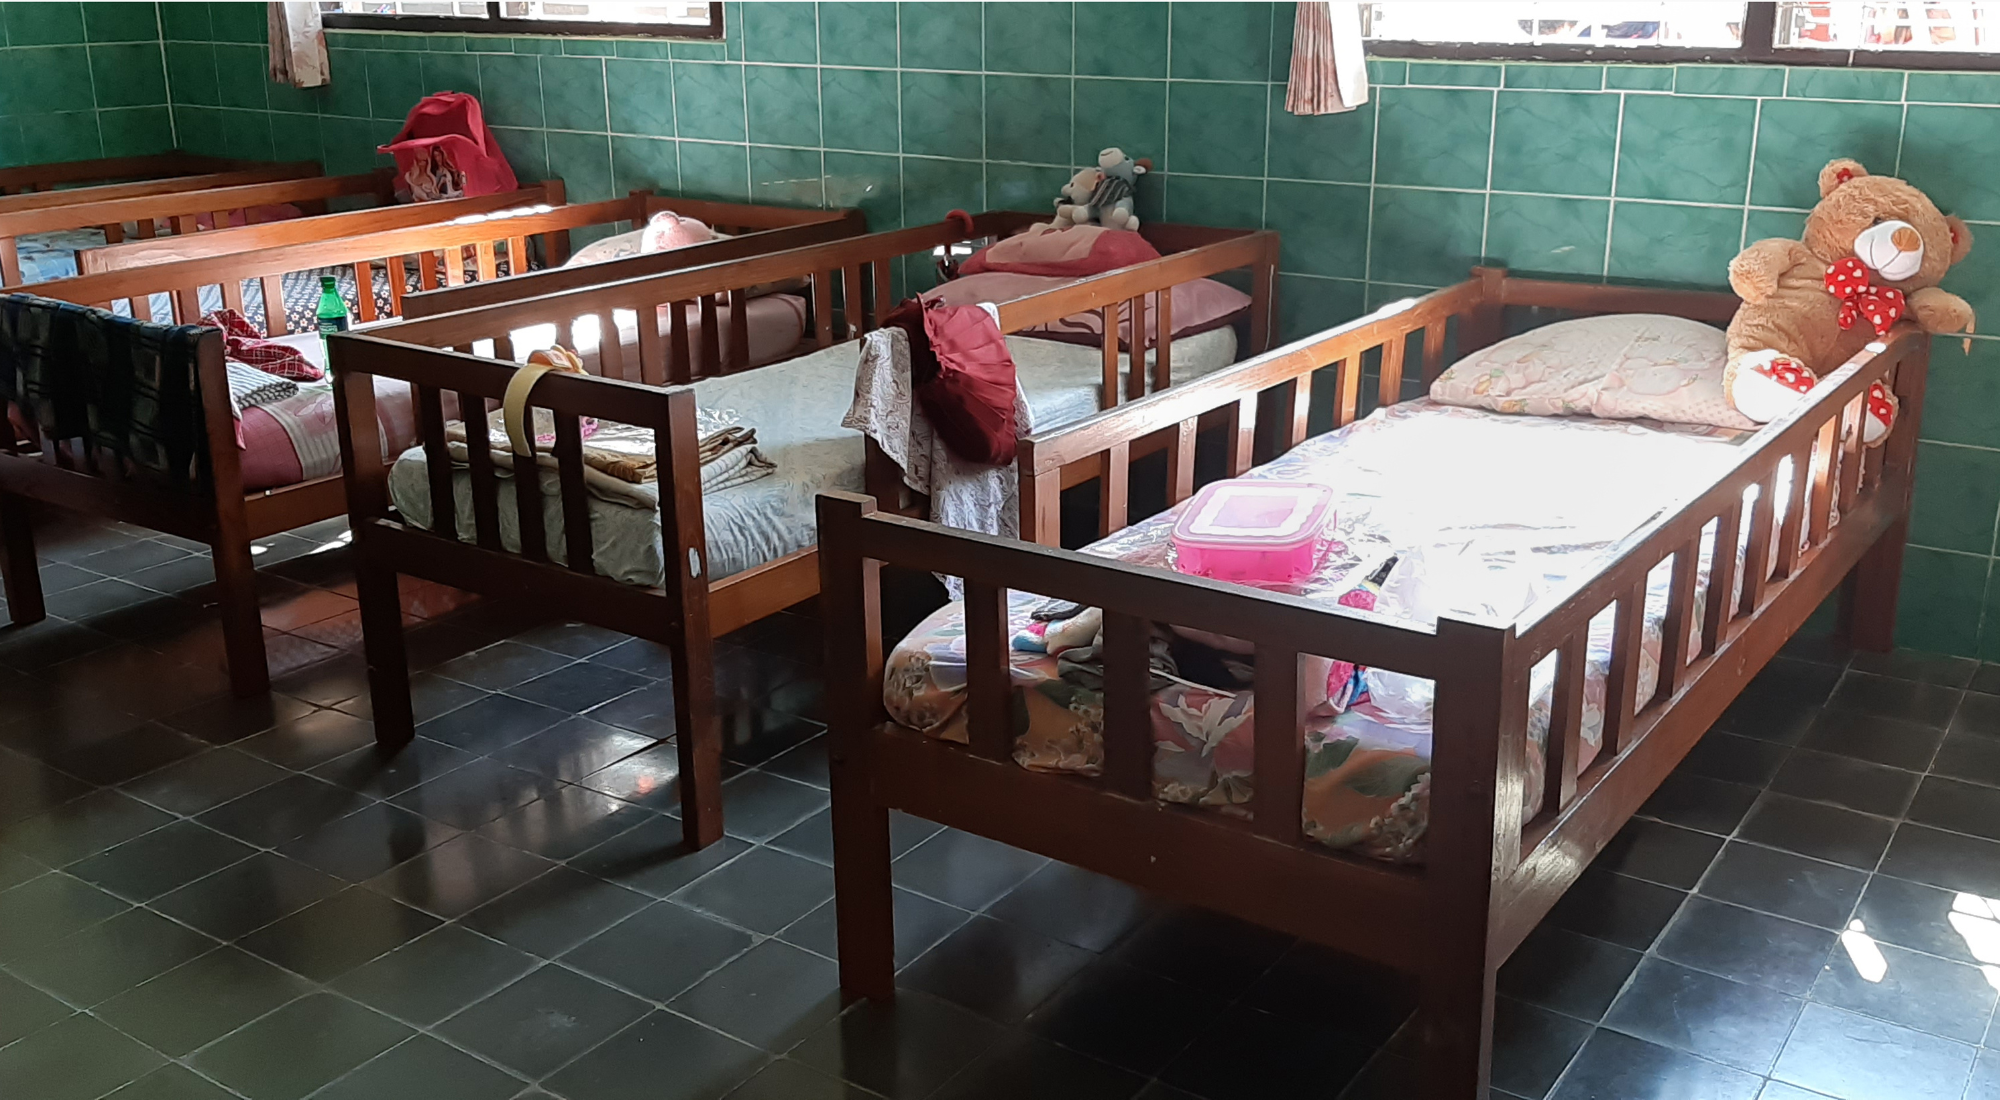 Wooden beds in an orphanage